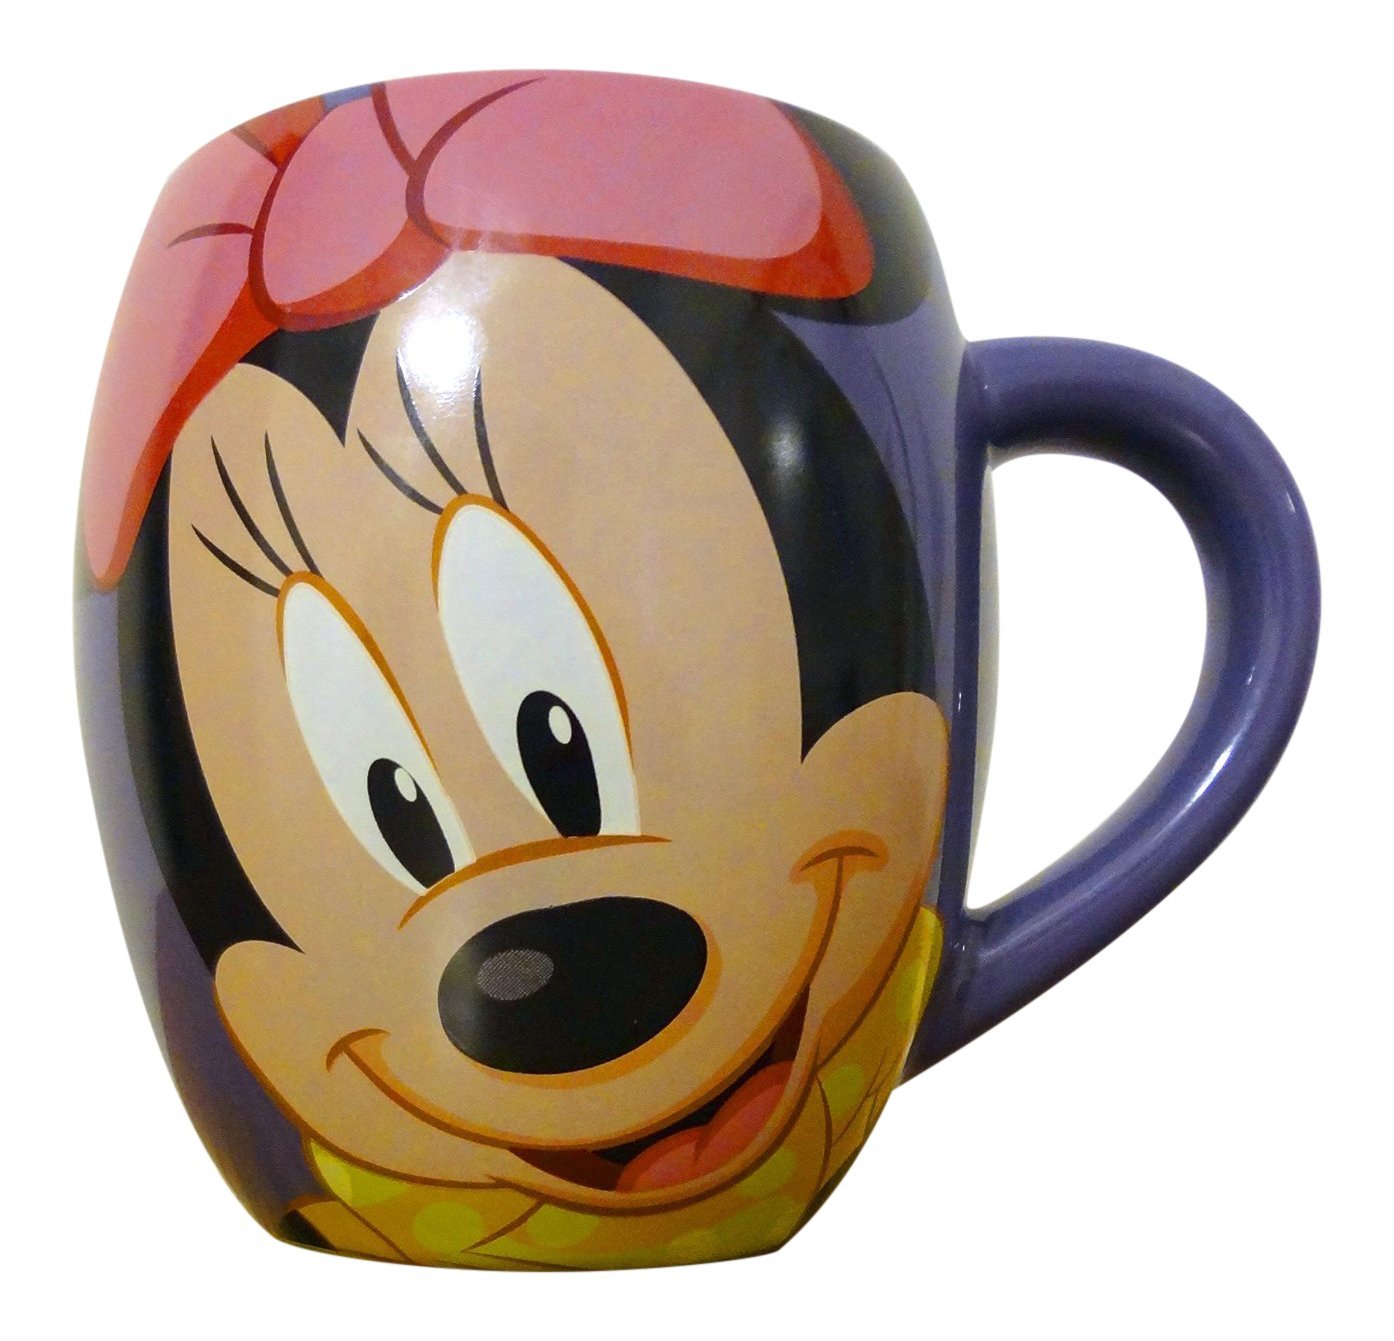 Primary image for Disney Parks Exclusive Minnie Mouse Sweet! Face Coffee Mug Cup